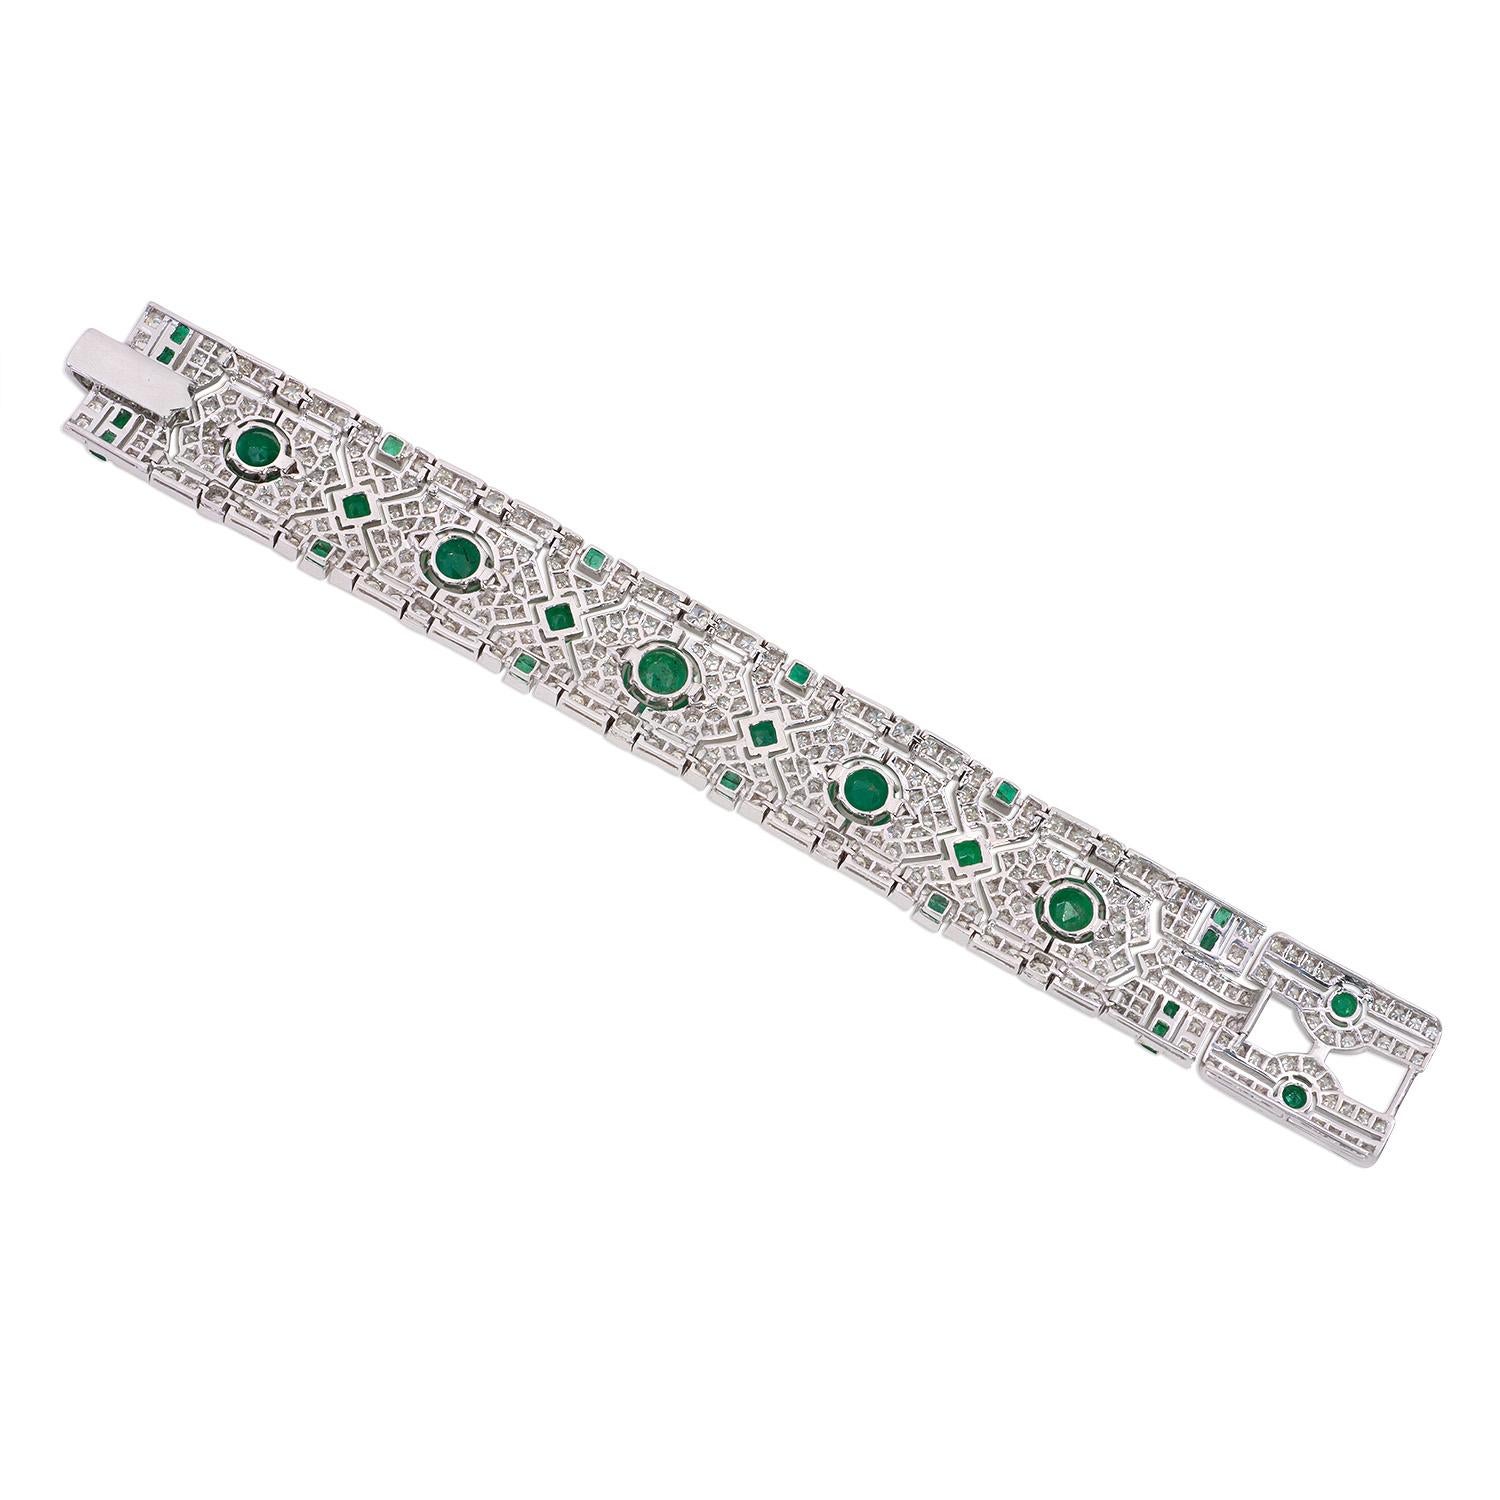 13.92 Carat Emerald and Diamond Art Deco Style Bracelet For Sale at 1stDibs